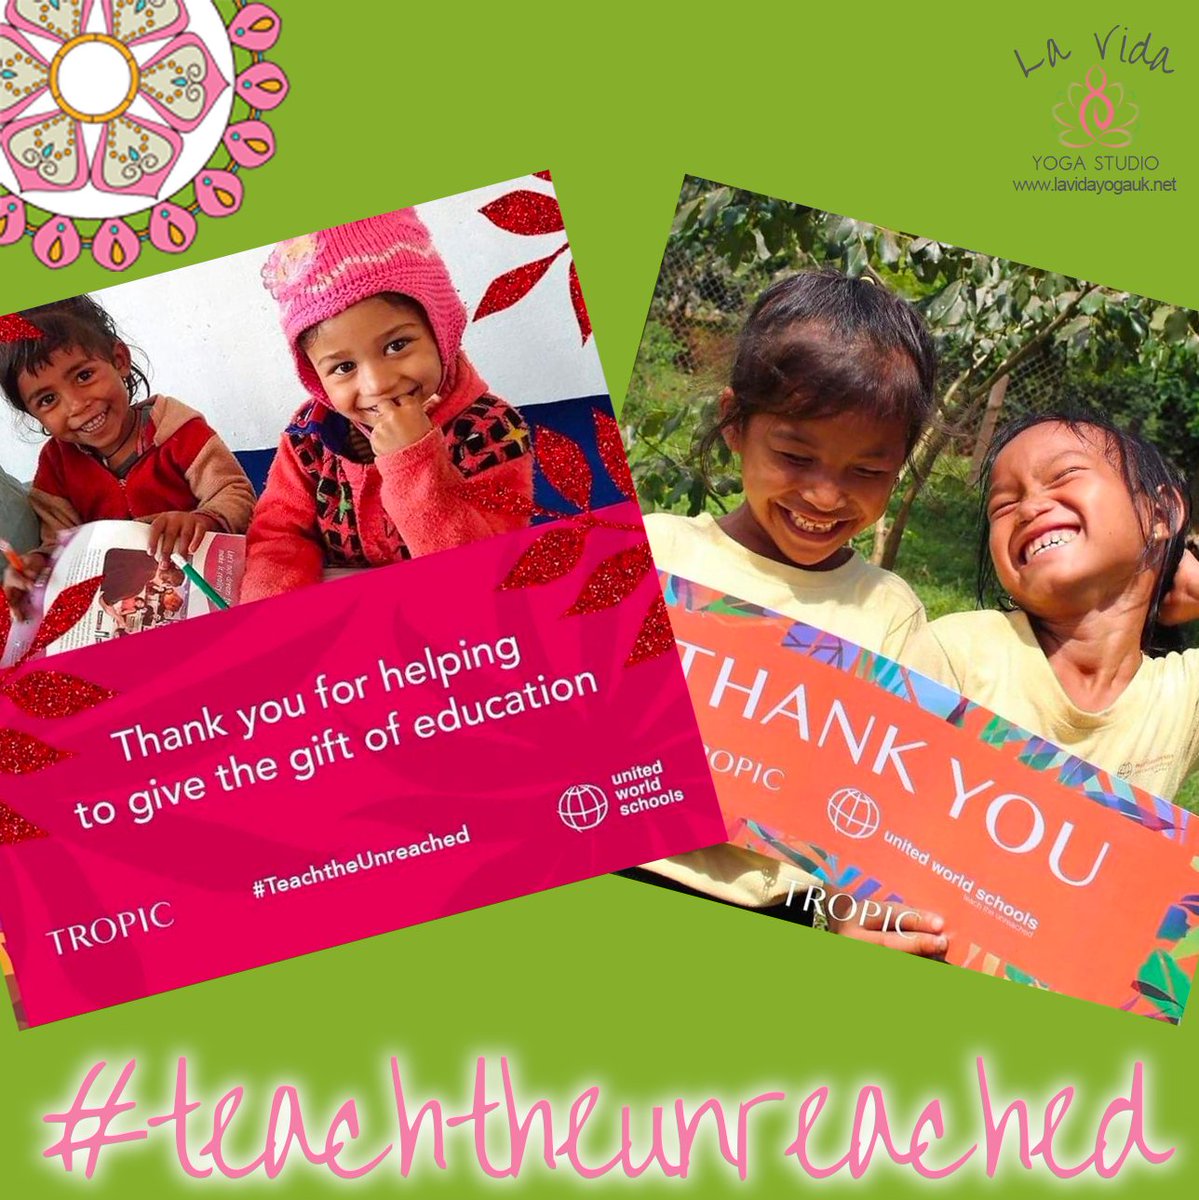 Thank you to all my #tropiccustomers
You have helped to provide an #educationforchildren in the #poorestparts of the world
lavidayogauk.net⁠
#tropicskincareuk #lovetropic #lavidayogauk #teachtheunreached #UnitedWorldSchools #UWS #ethicalbeauty #veganbeauty #feedyourskin